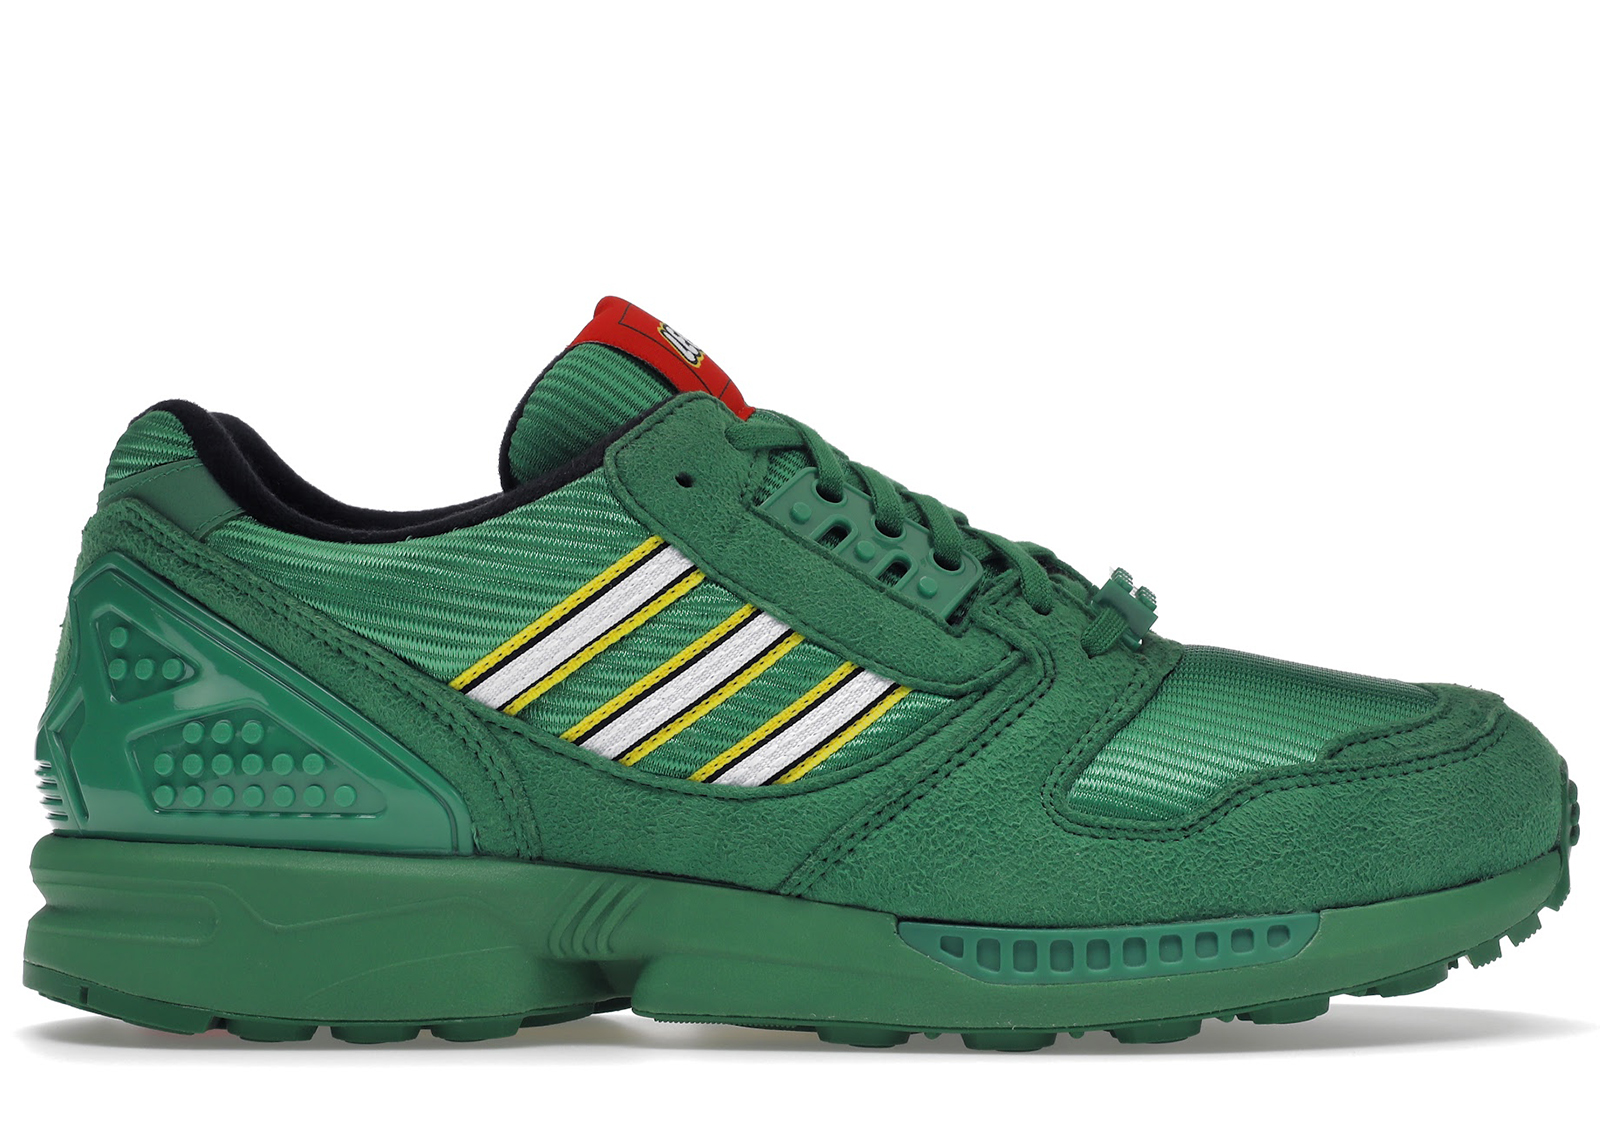 adidas ZX 8000 LEGO Color Pack Green Men's - FY7082 - US